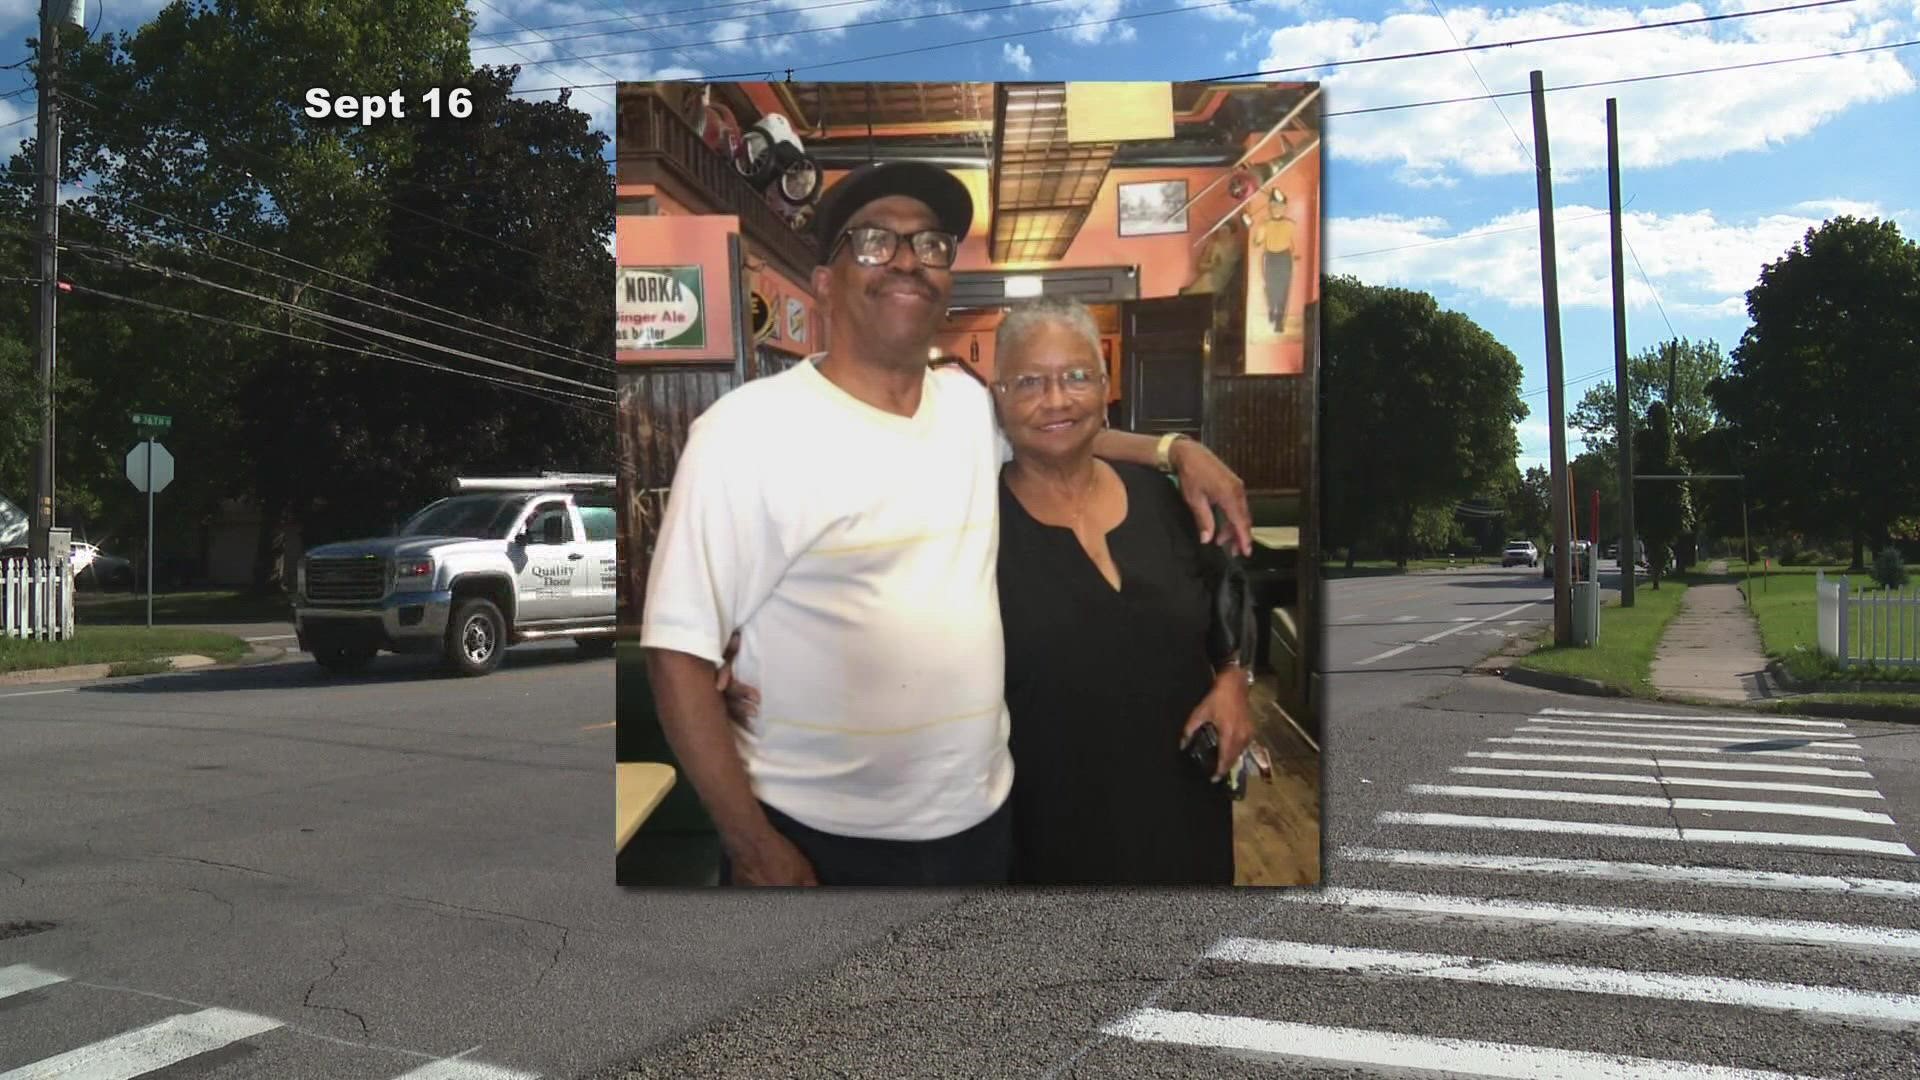 Cecile Brown was conducting school crossing duties in the area of 36th Street SE and Poinsettia Avenue SE on Sept. 16 when she was hit by a car.